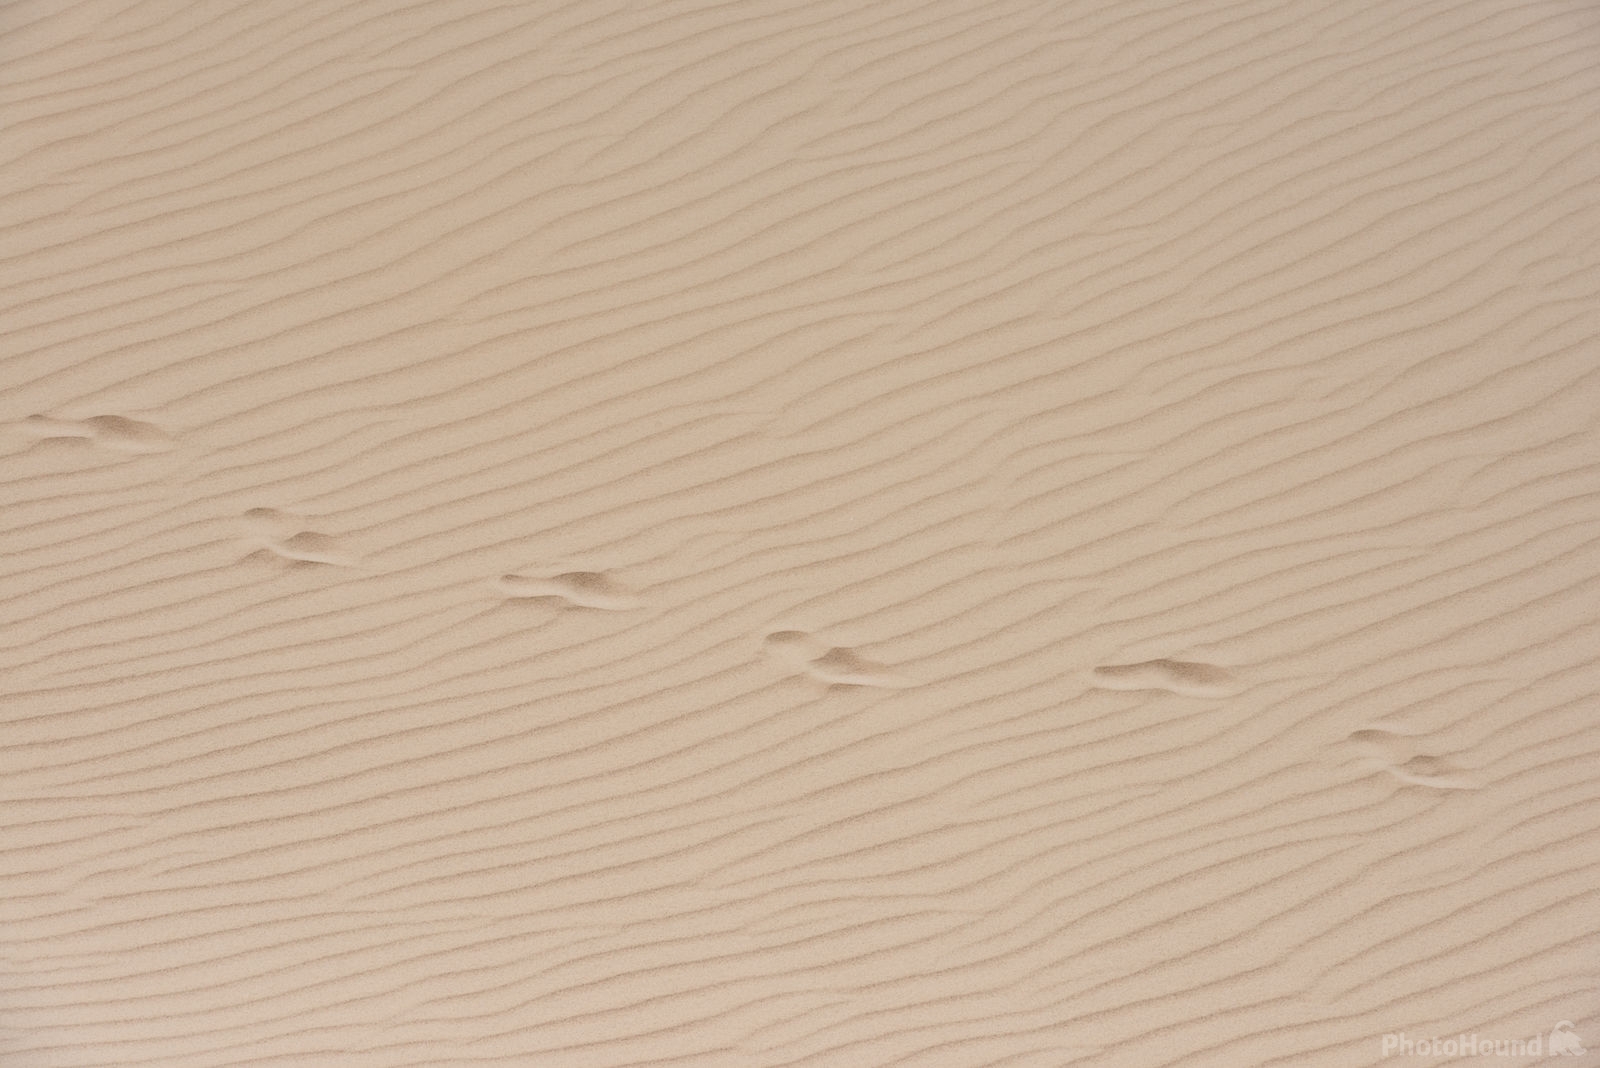 Image of Steroh Sand Dunes, Socotra by Luka Esenko